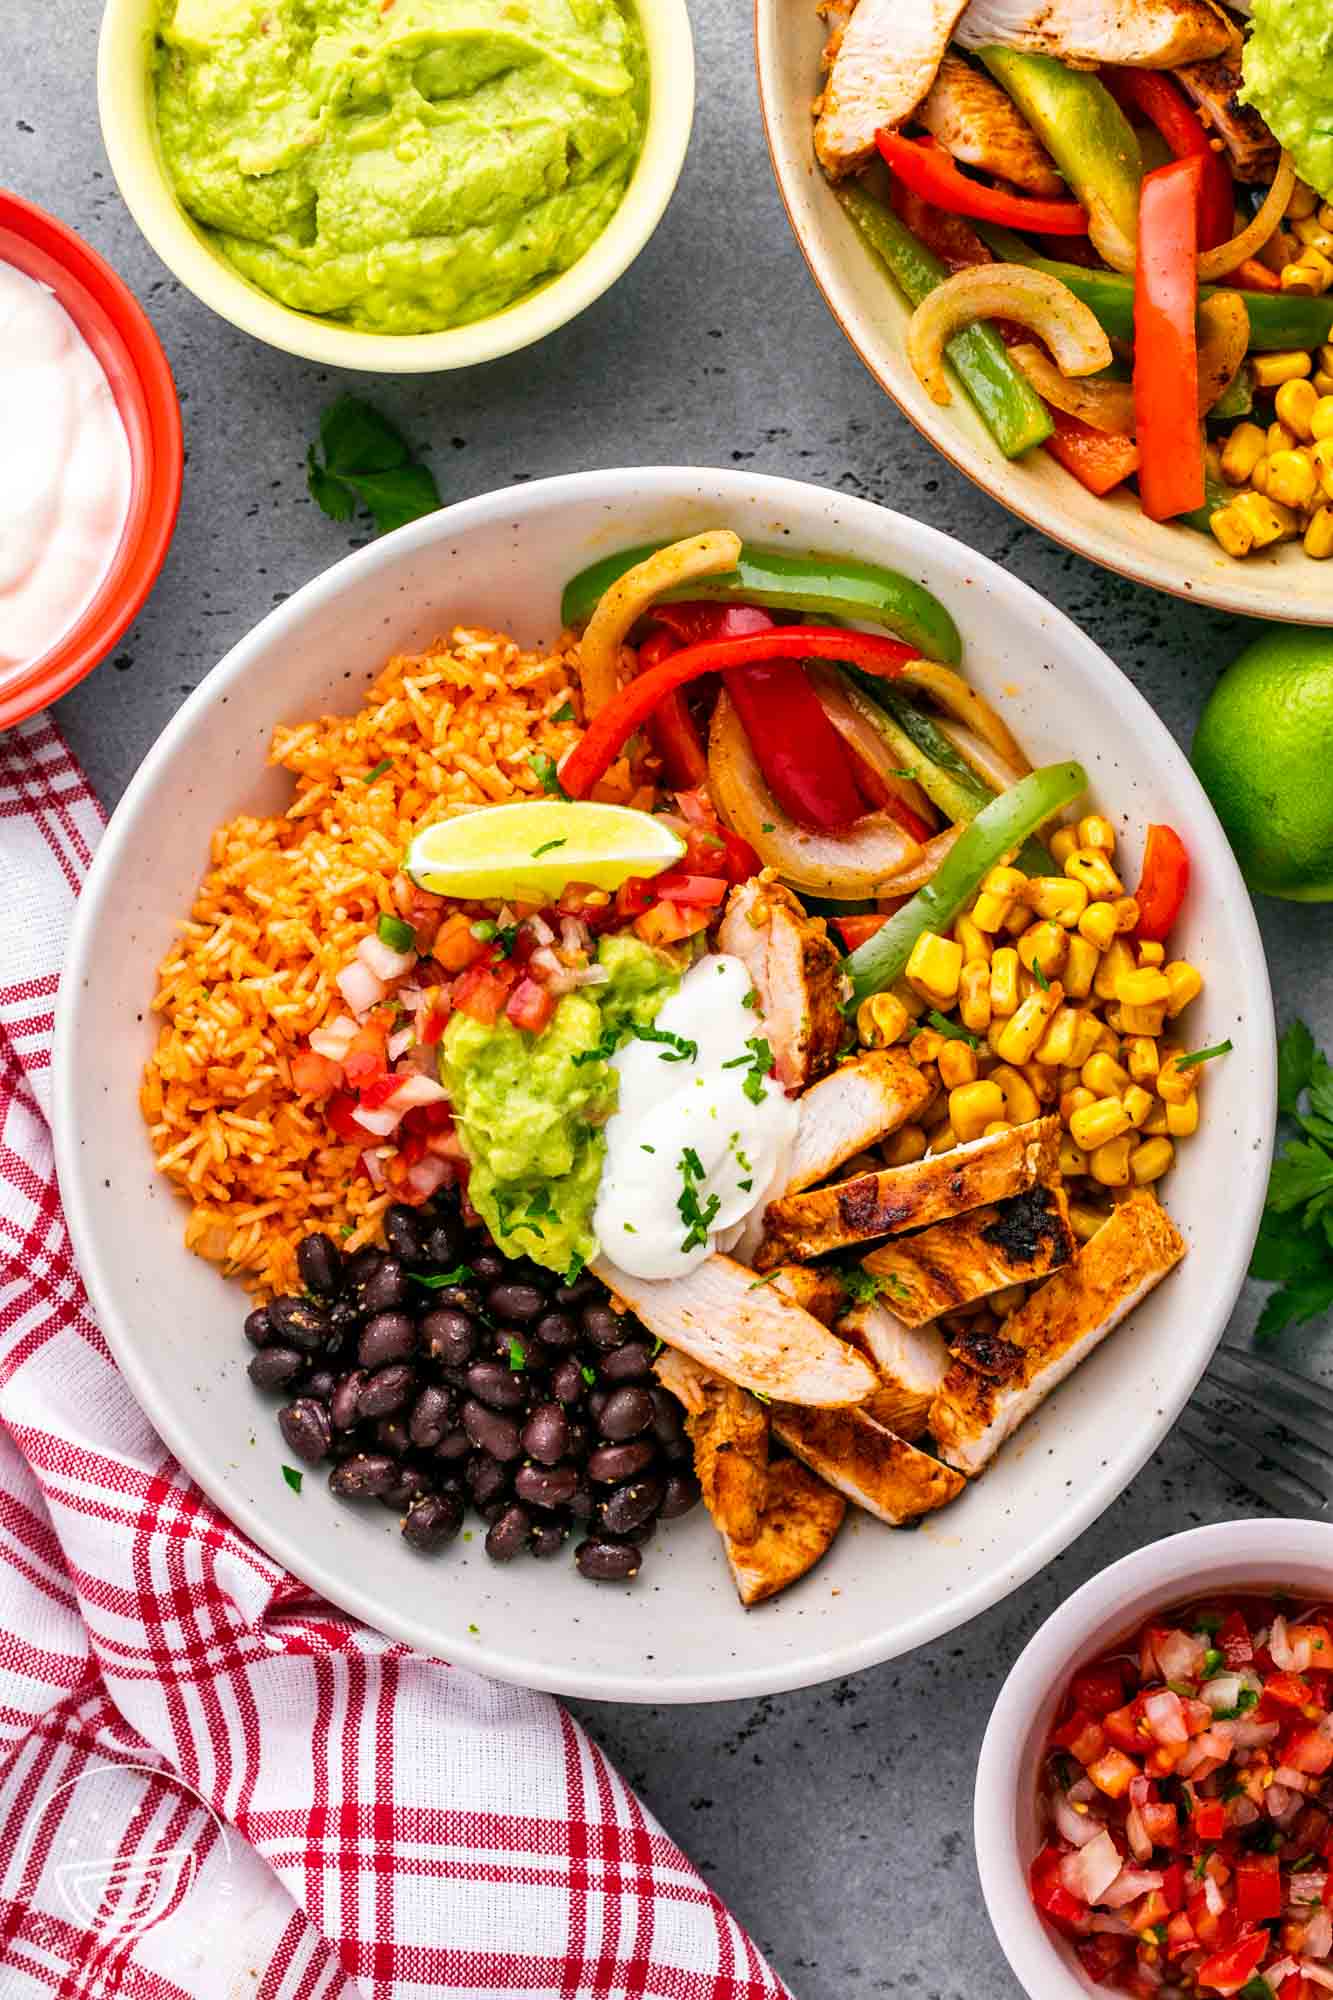 a white bowl filled with mexican rice, sliced chicken, fajita veggies, corn, and beans. Topped with sour cream and guacamole.